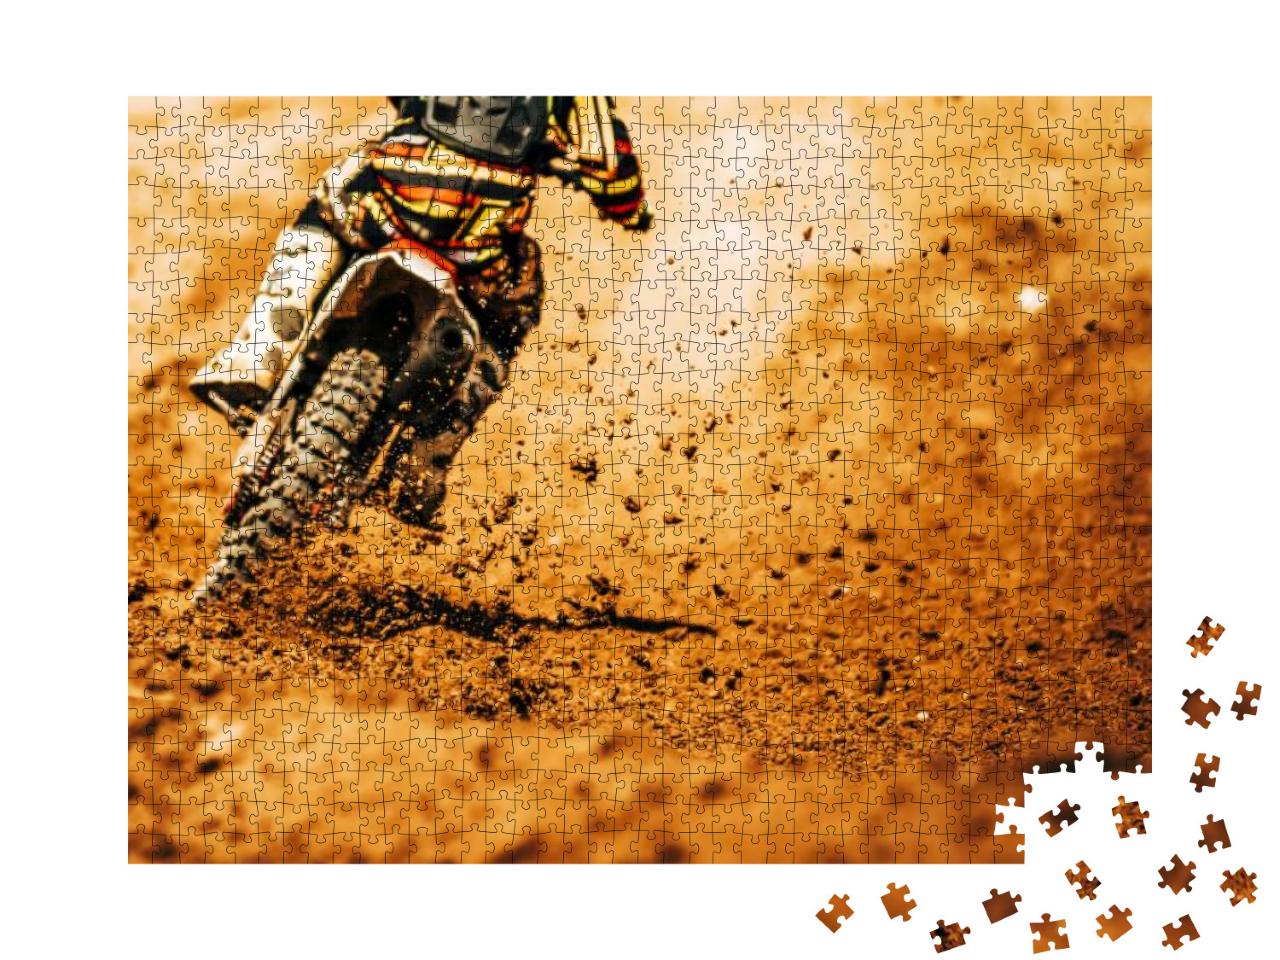 Details of Debris in a Motocross Race... Jigsaw Puzzle with 1000 pieces